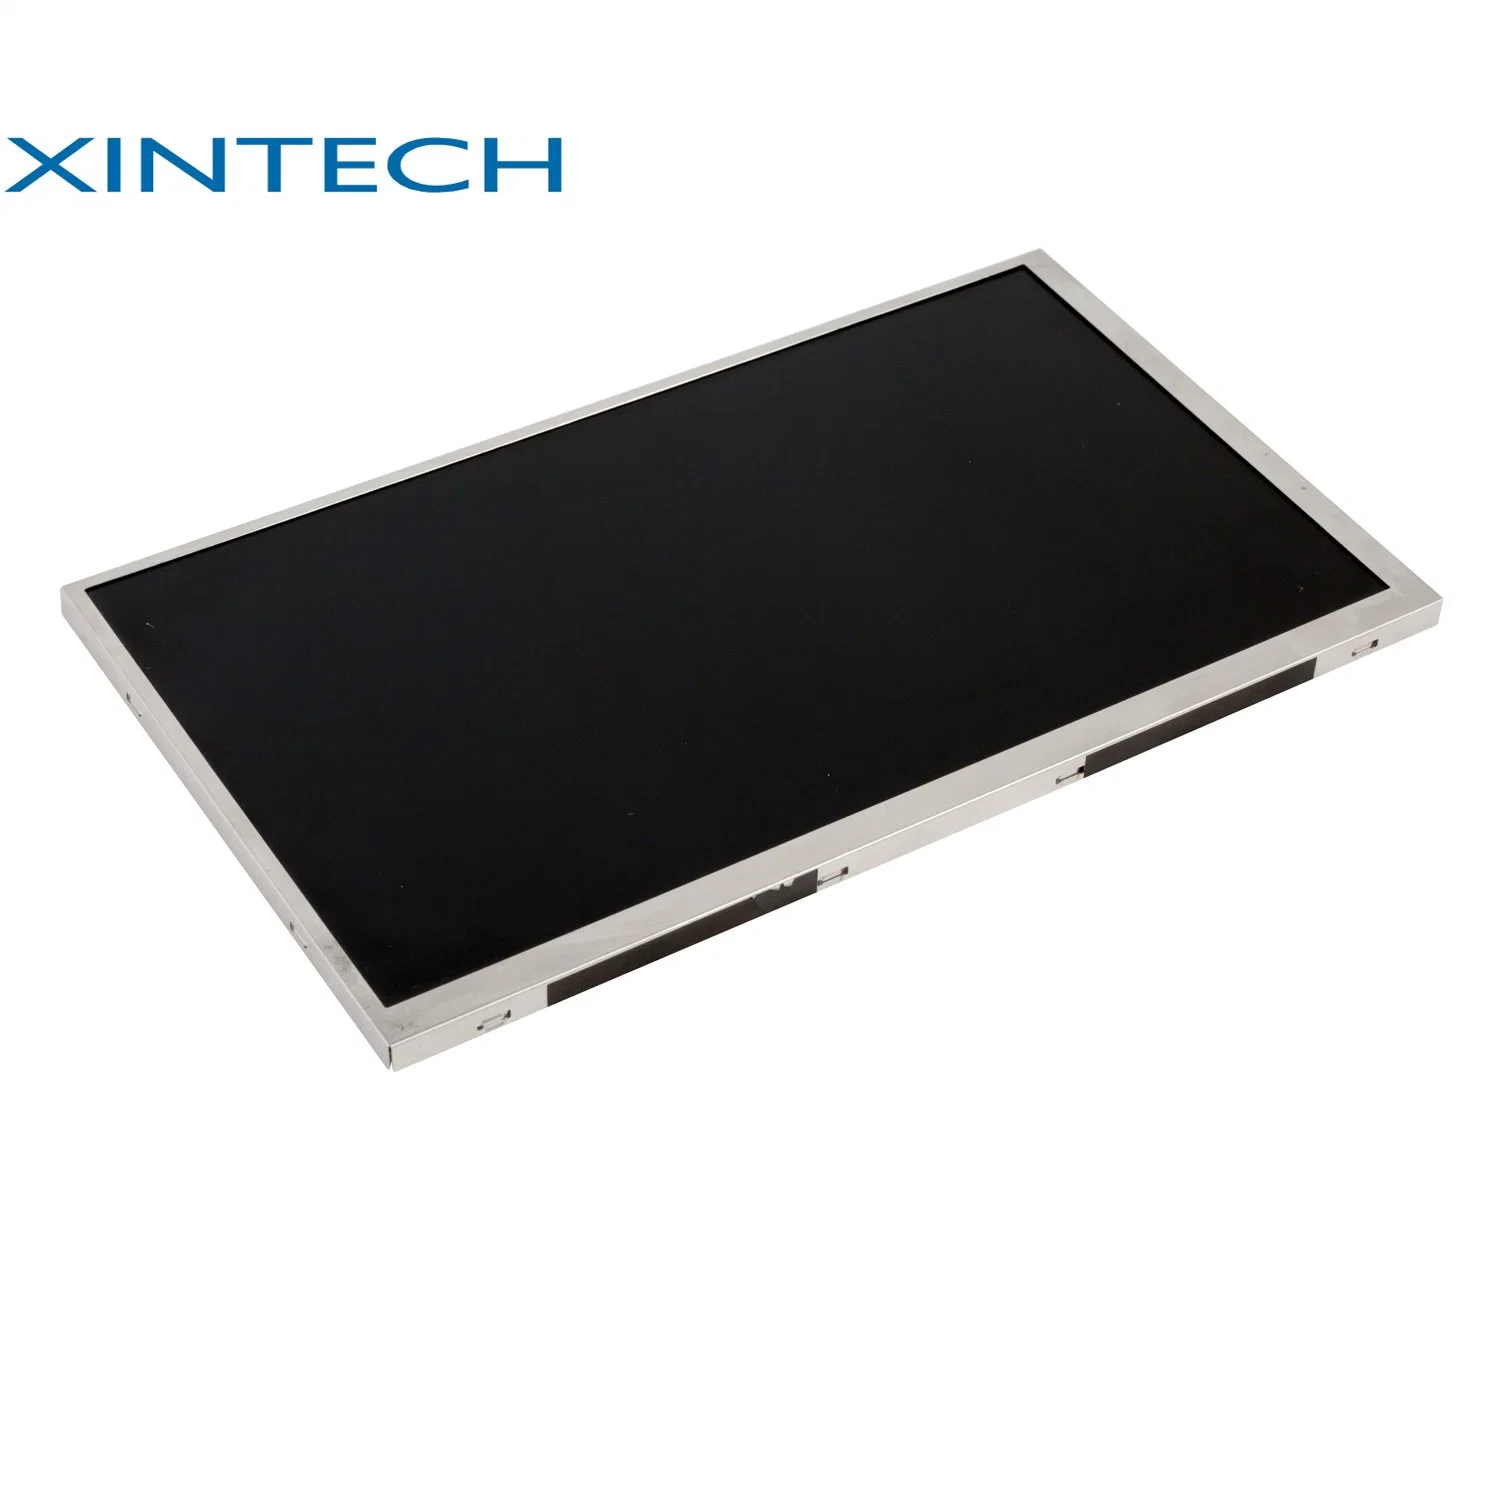 Full HD 1080P 13.3 Inch TFT LCD Display Capacitive Touch Screen